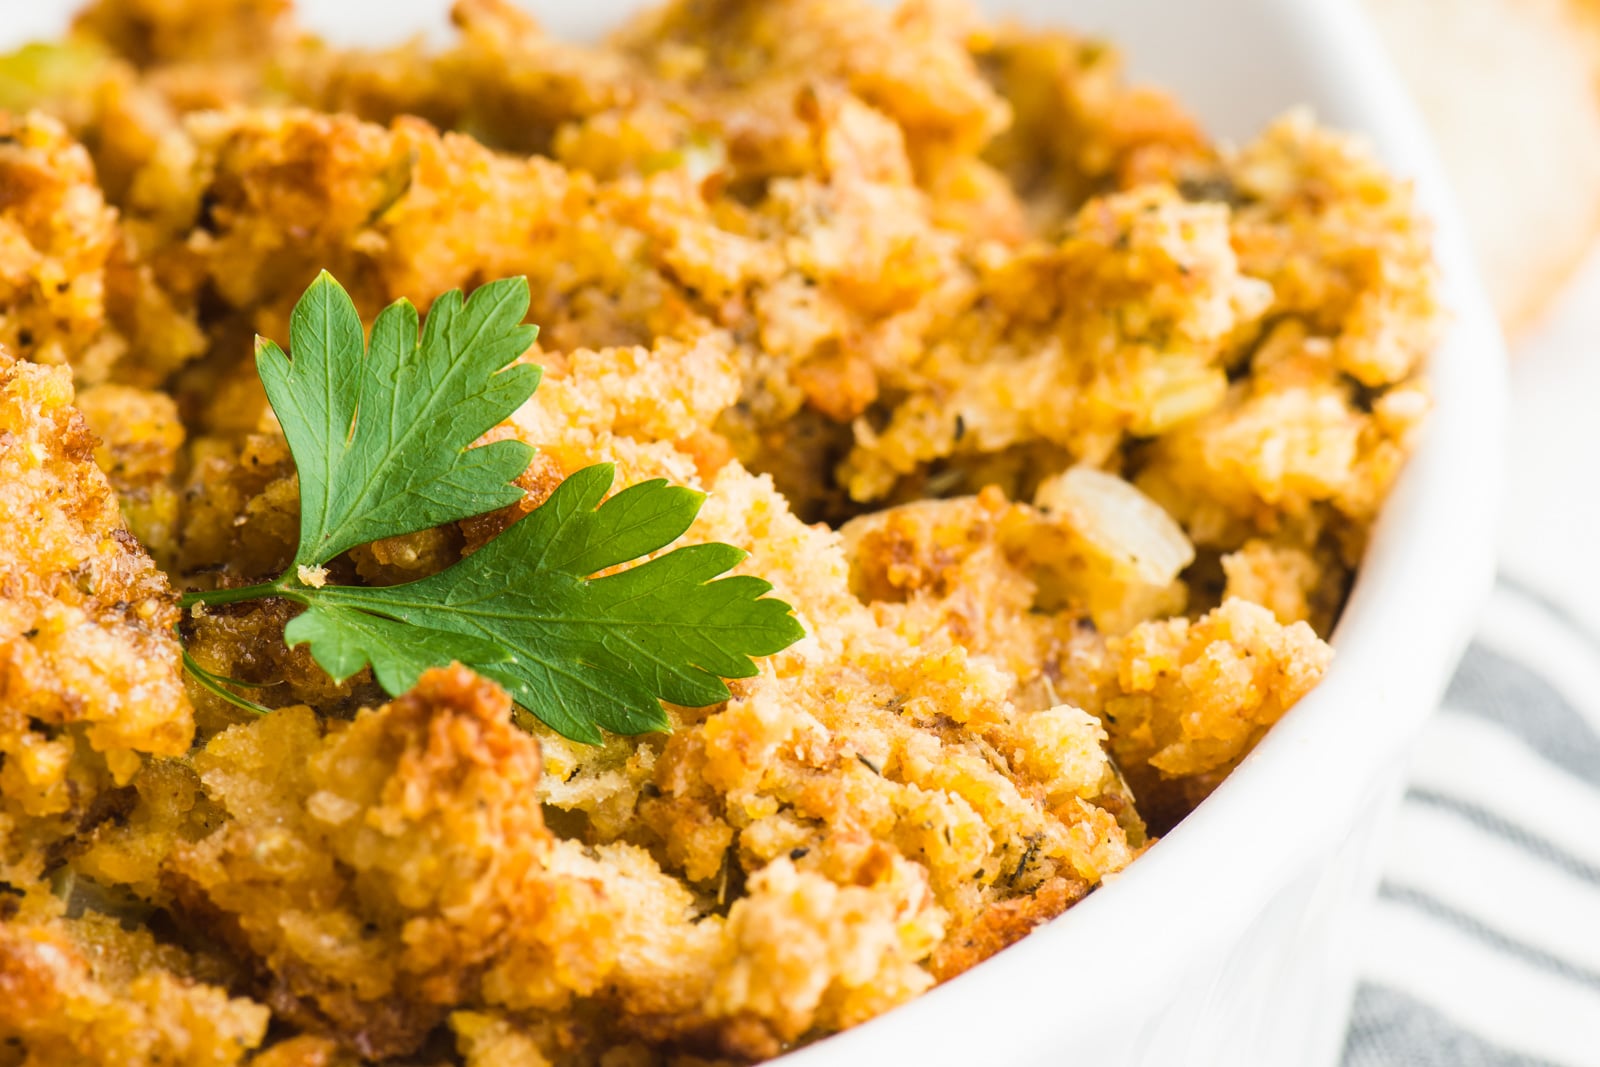 Vegan stuffing is in a white casserole dish and is topped with a fresh parsley sprig.